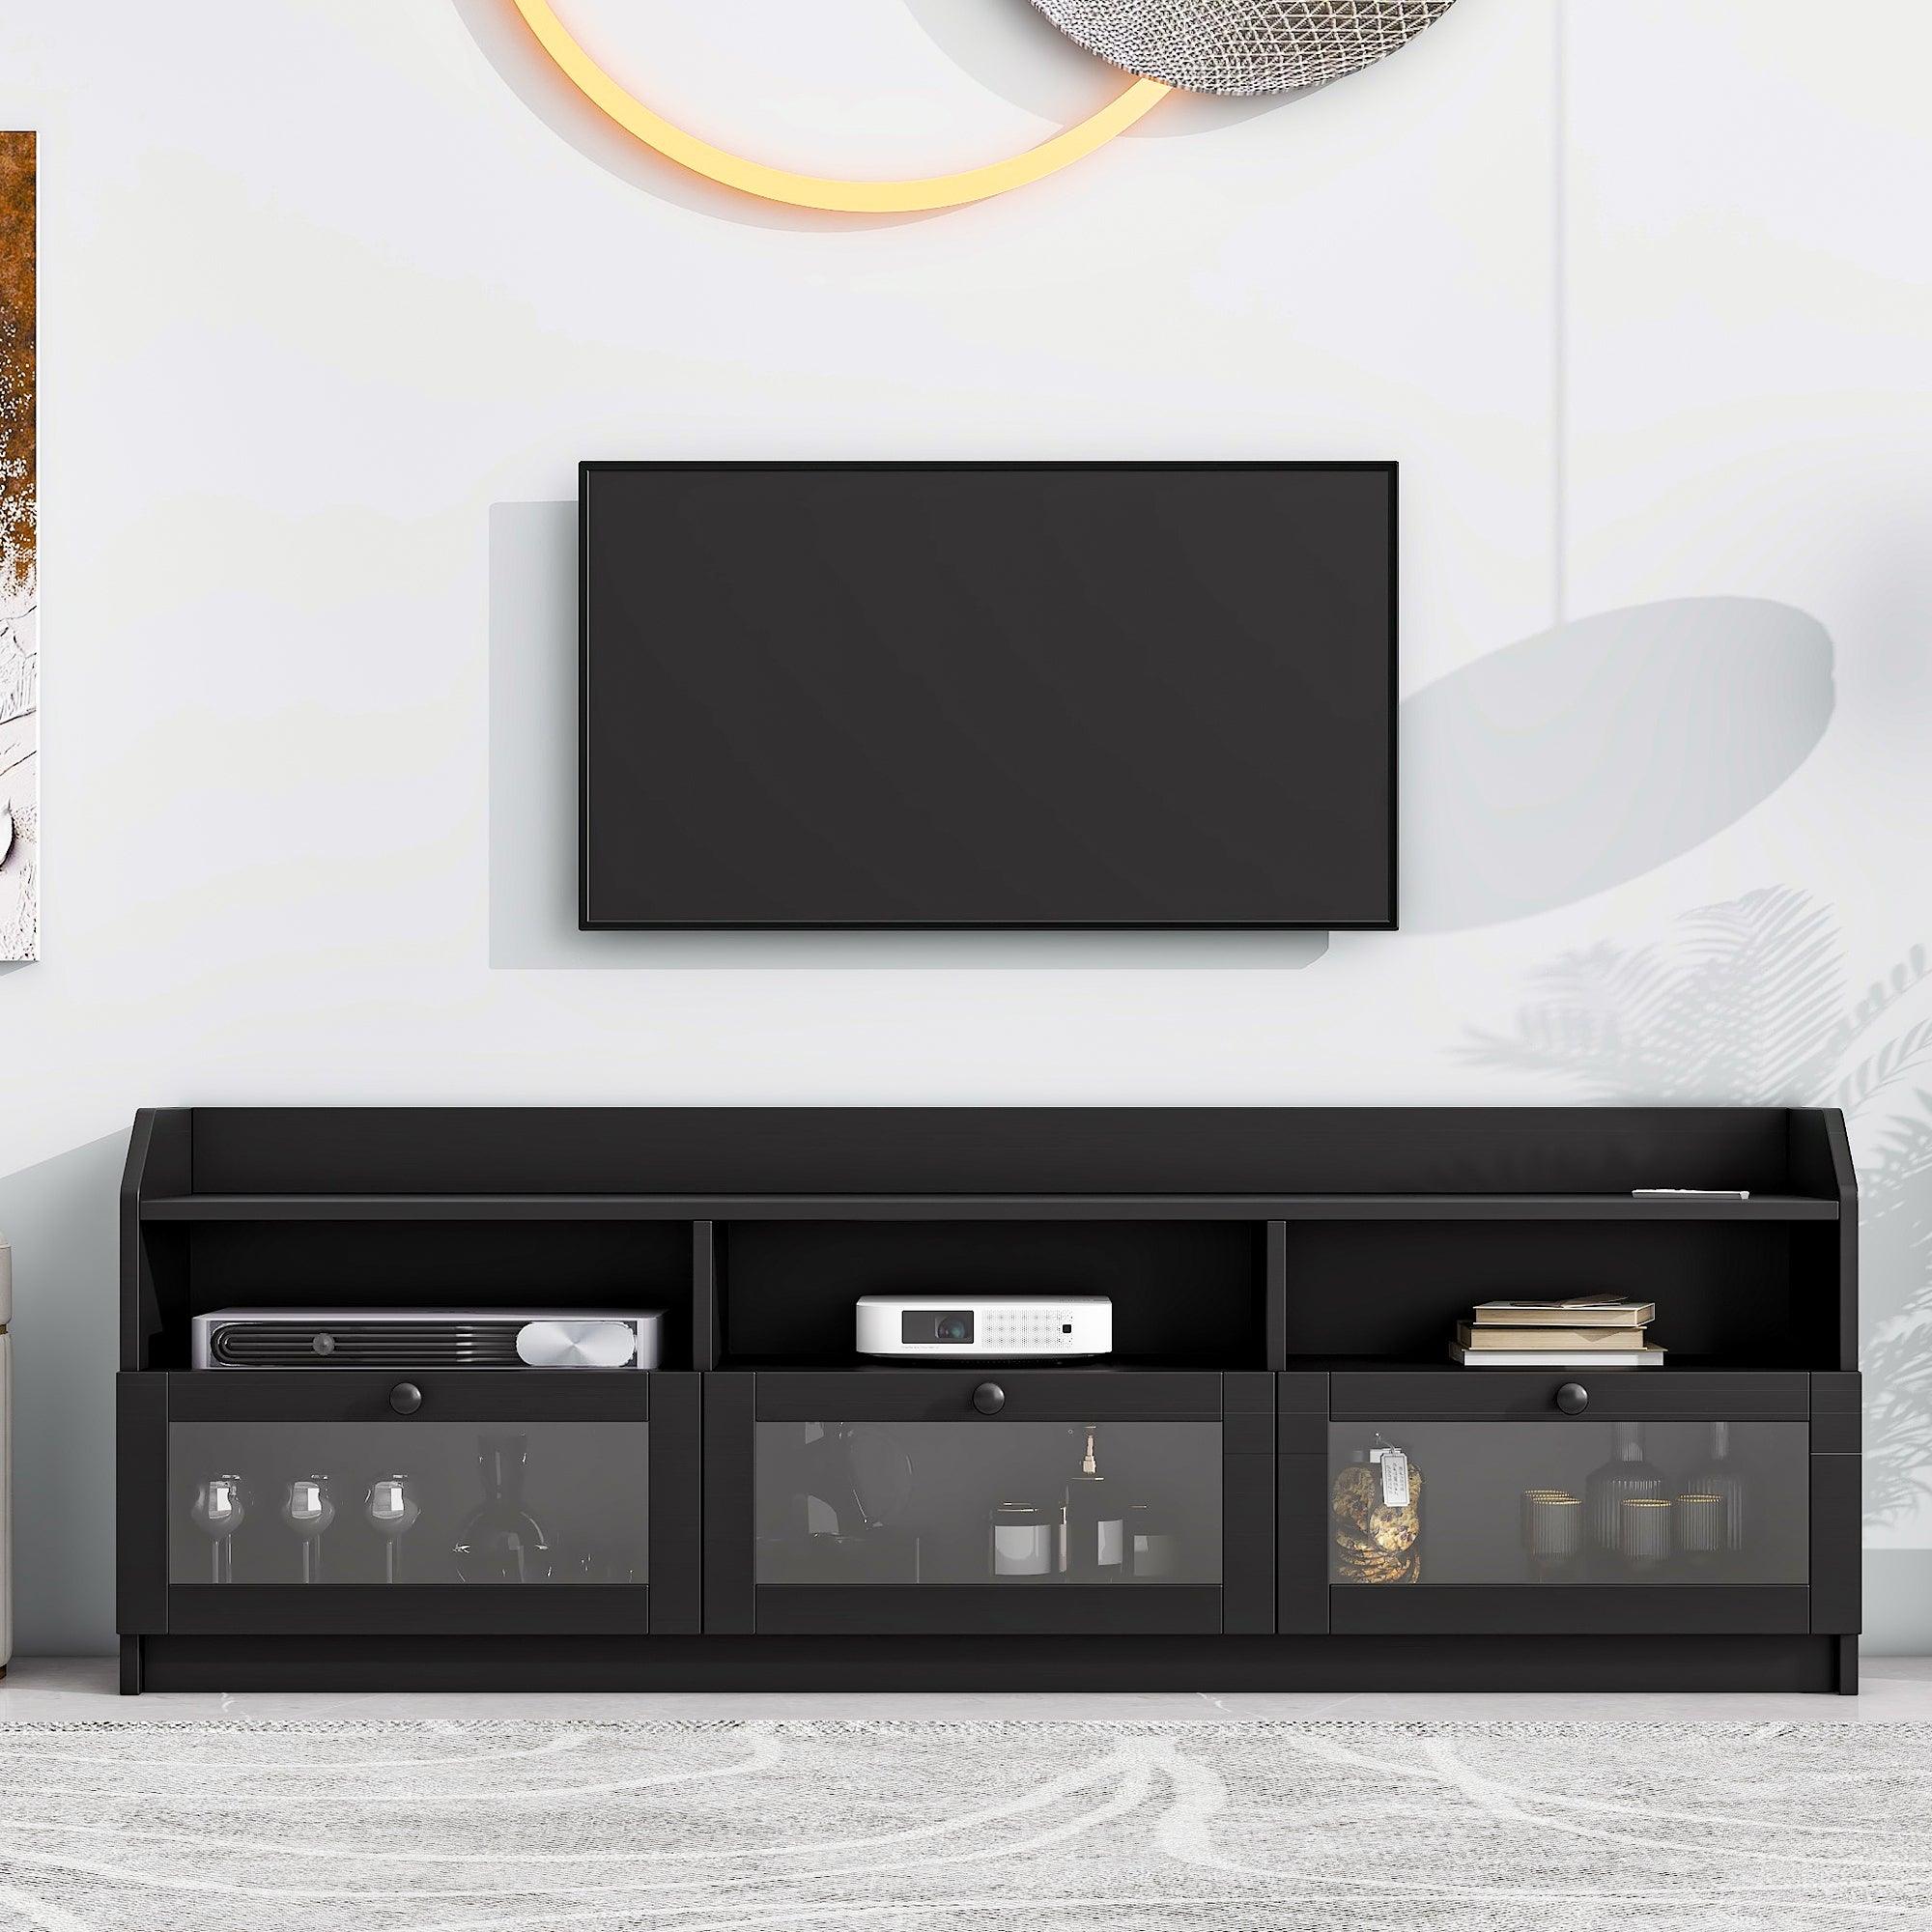 🆓🚛 Sleek & Modern Design Tv Stand With Acrylic Board Door, Chic Elegant Media Console for Tvs Up To 65", Ample Storage Space Tv Cabinet With Black Handles, Black